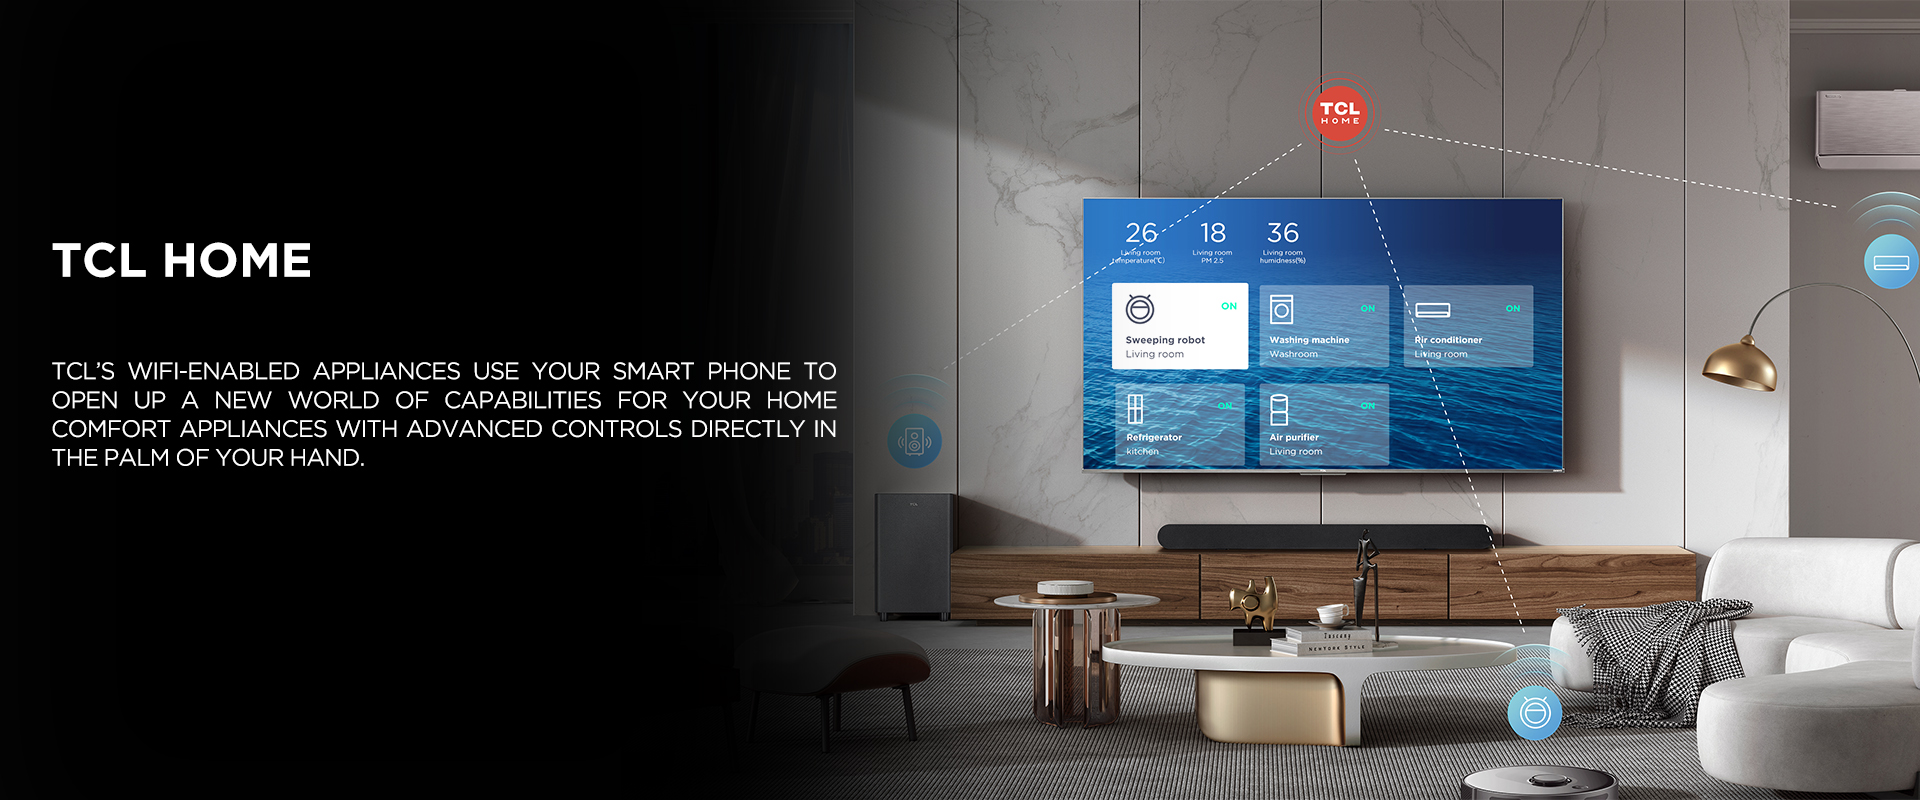 TCL HOME - TCL????s WiFi-enabled appliances use your smart phone to open up a new world of capabilities for your home comfort appliances with advanced controls directly in the palm of your hand.